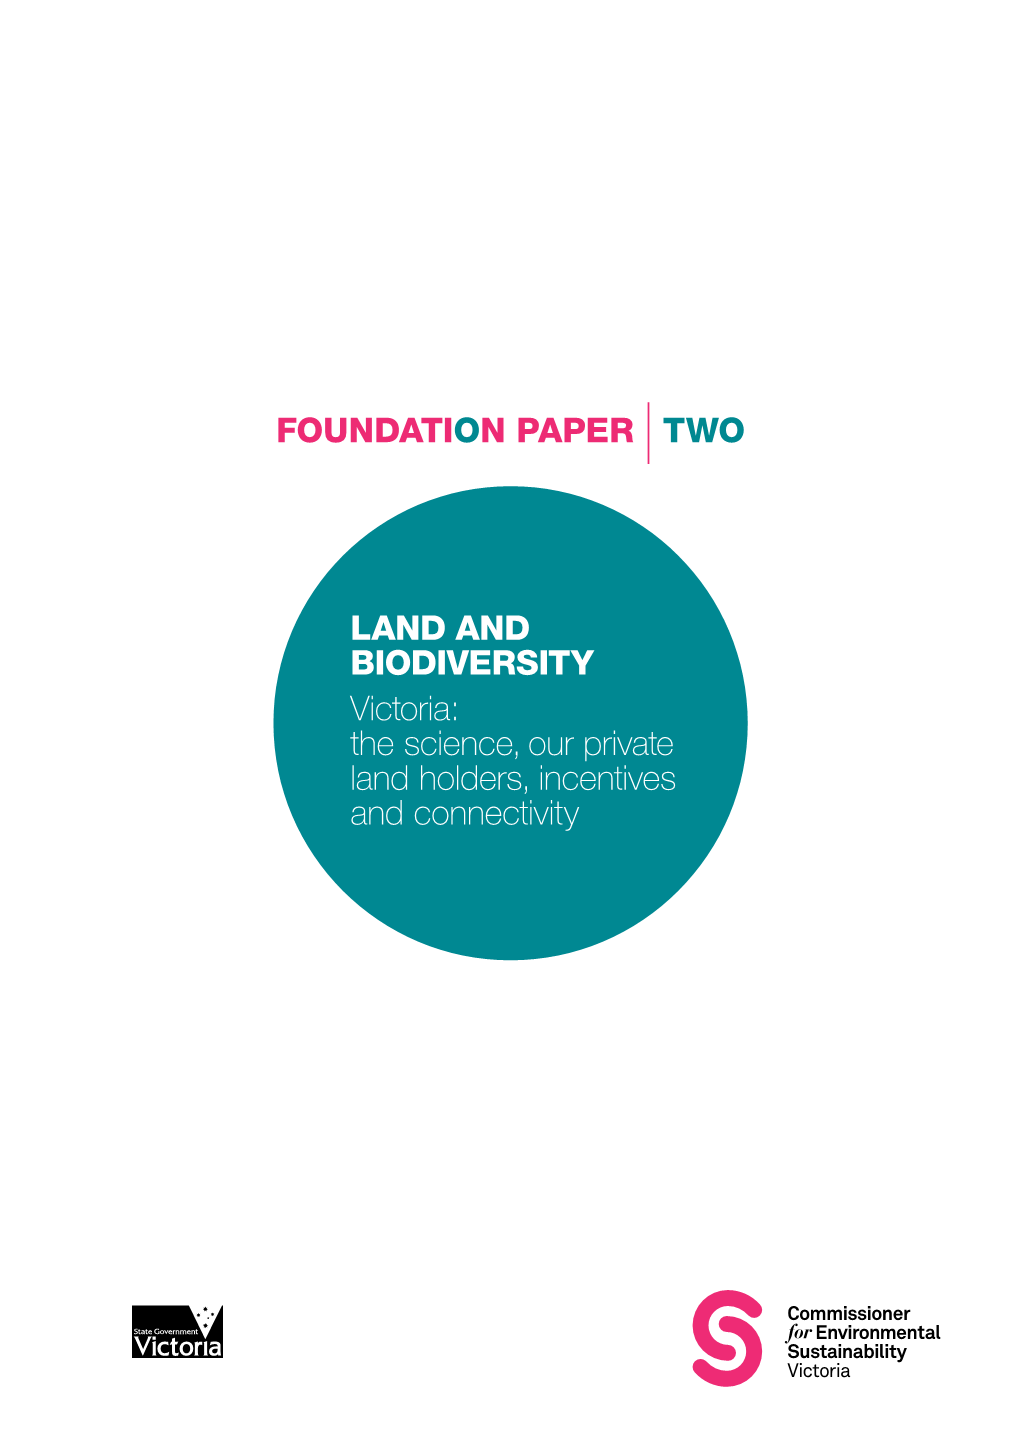 Foundation Paper Two: Land and Biodiversity